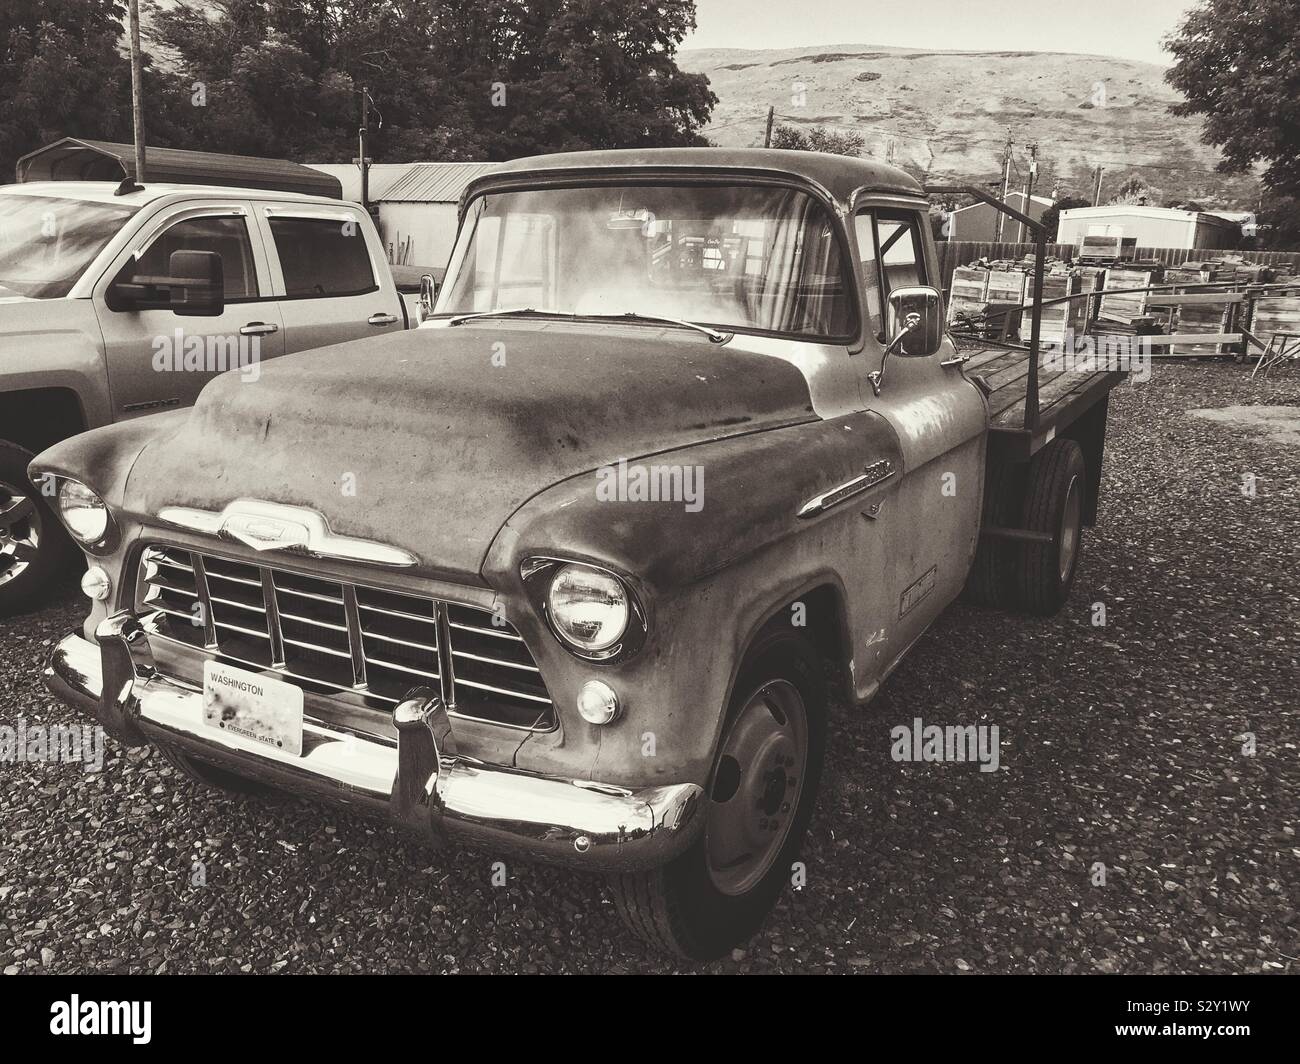 Vintage black and white photo of vintage fifties Chevy work truck 3/4 view Stock Photo